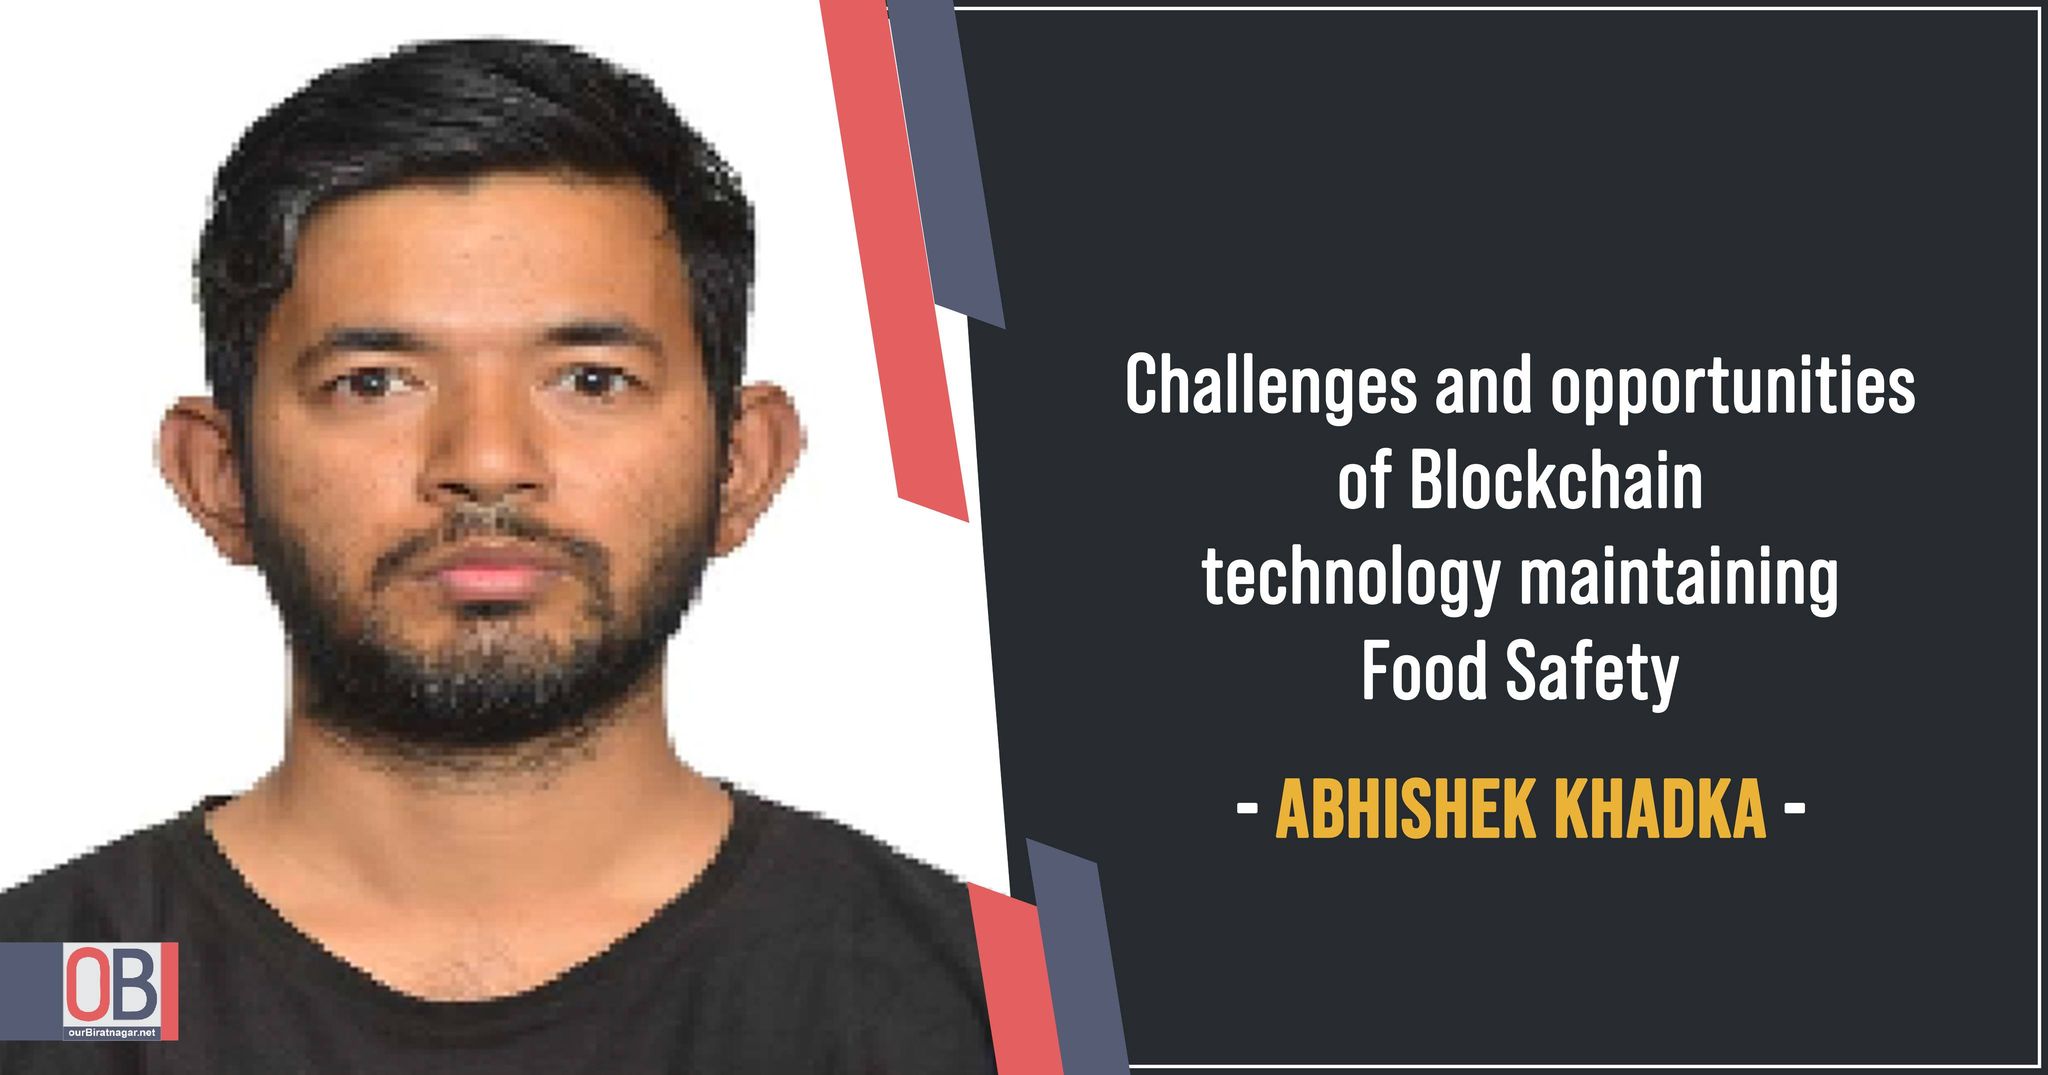 Challenges and opportunities of Blockchain technology maintaining Food Safety